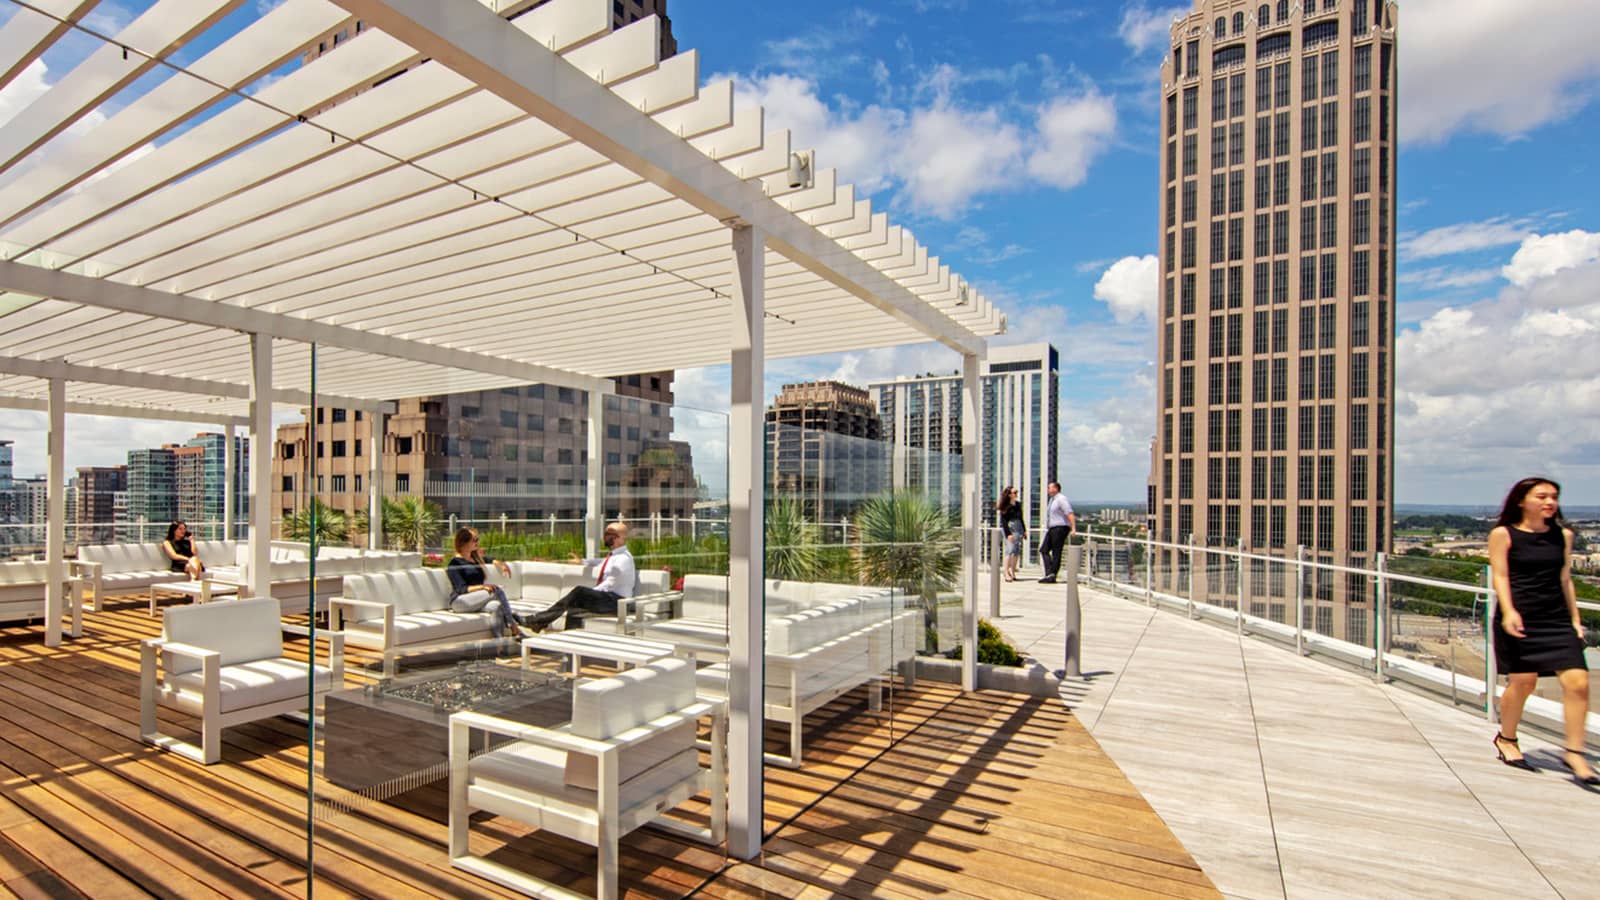 King and Spalding Atlanta open rooftop area